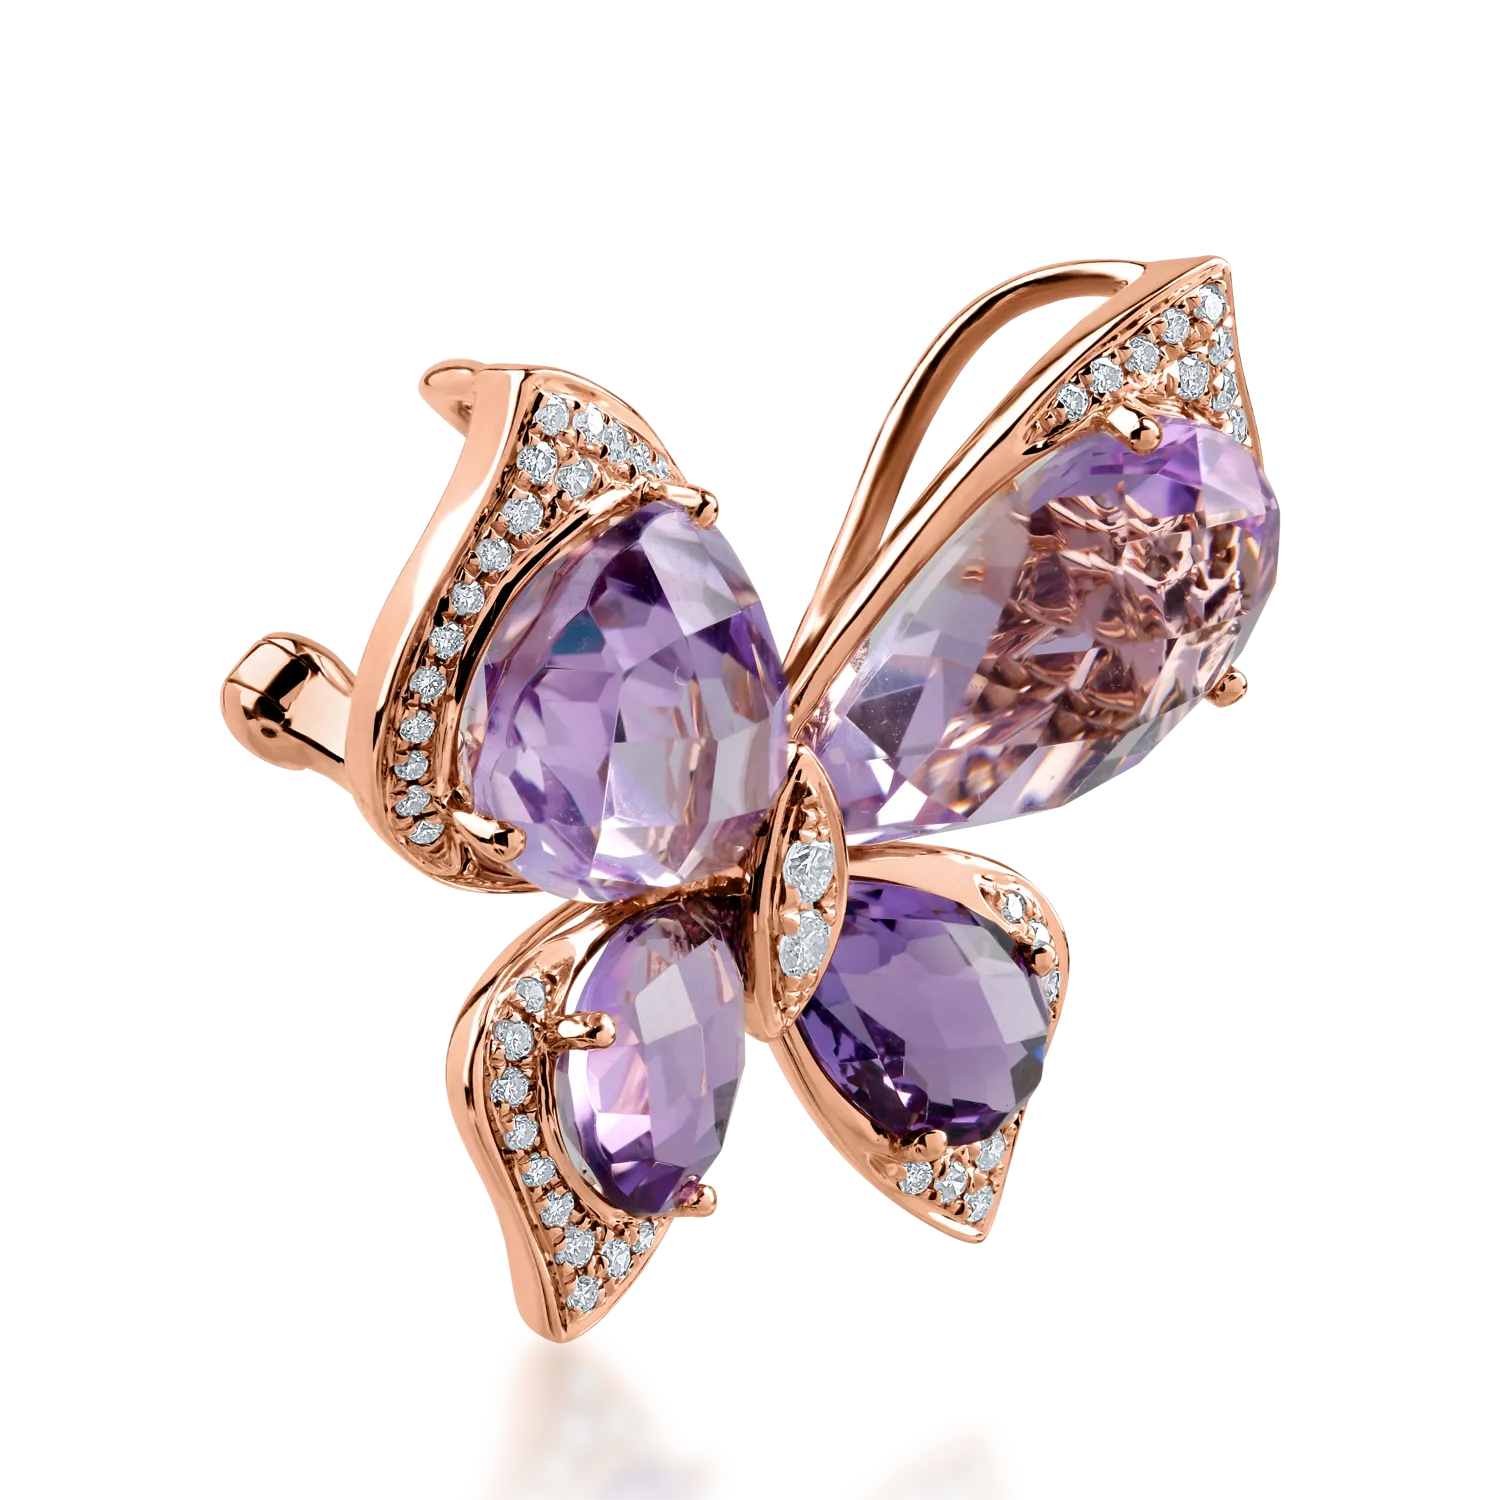 Rose gold butterfly brooch with 8.6ct amethysts and 0.23ct diamonds